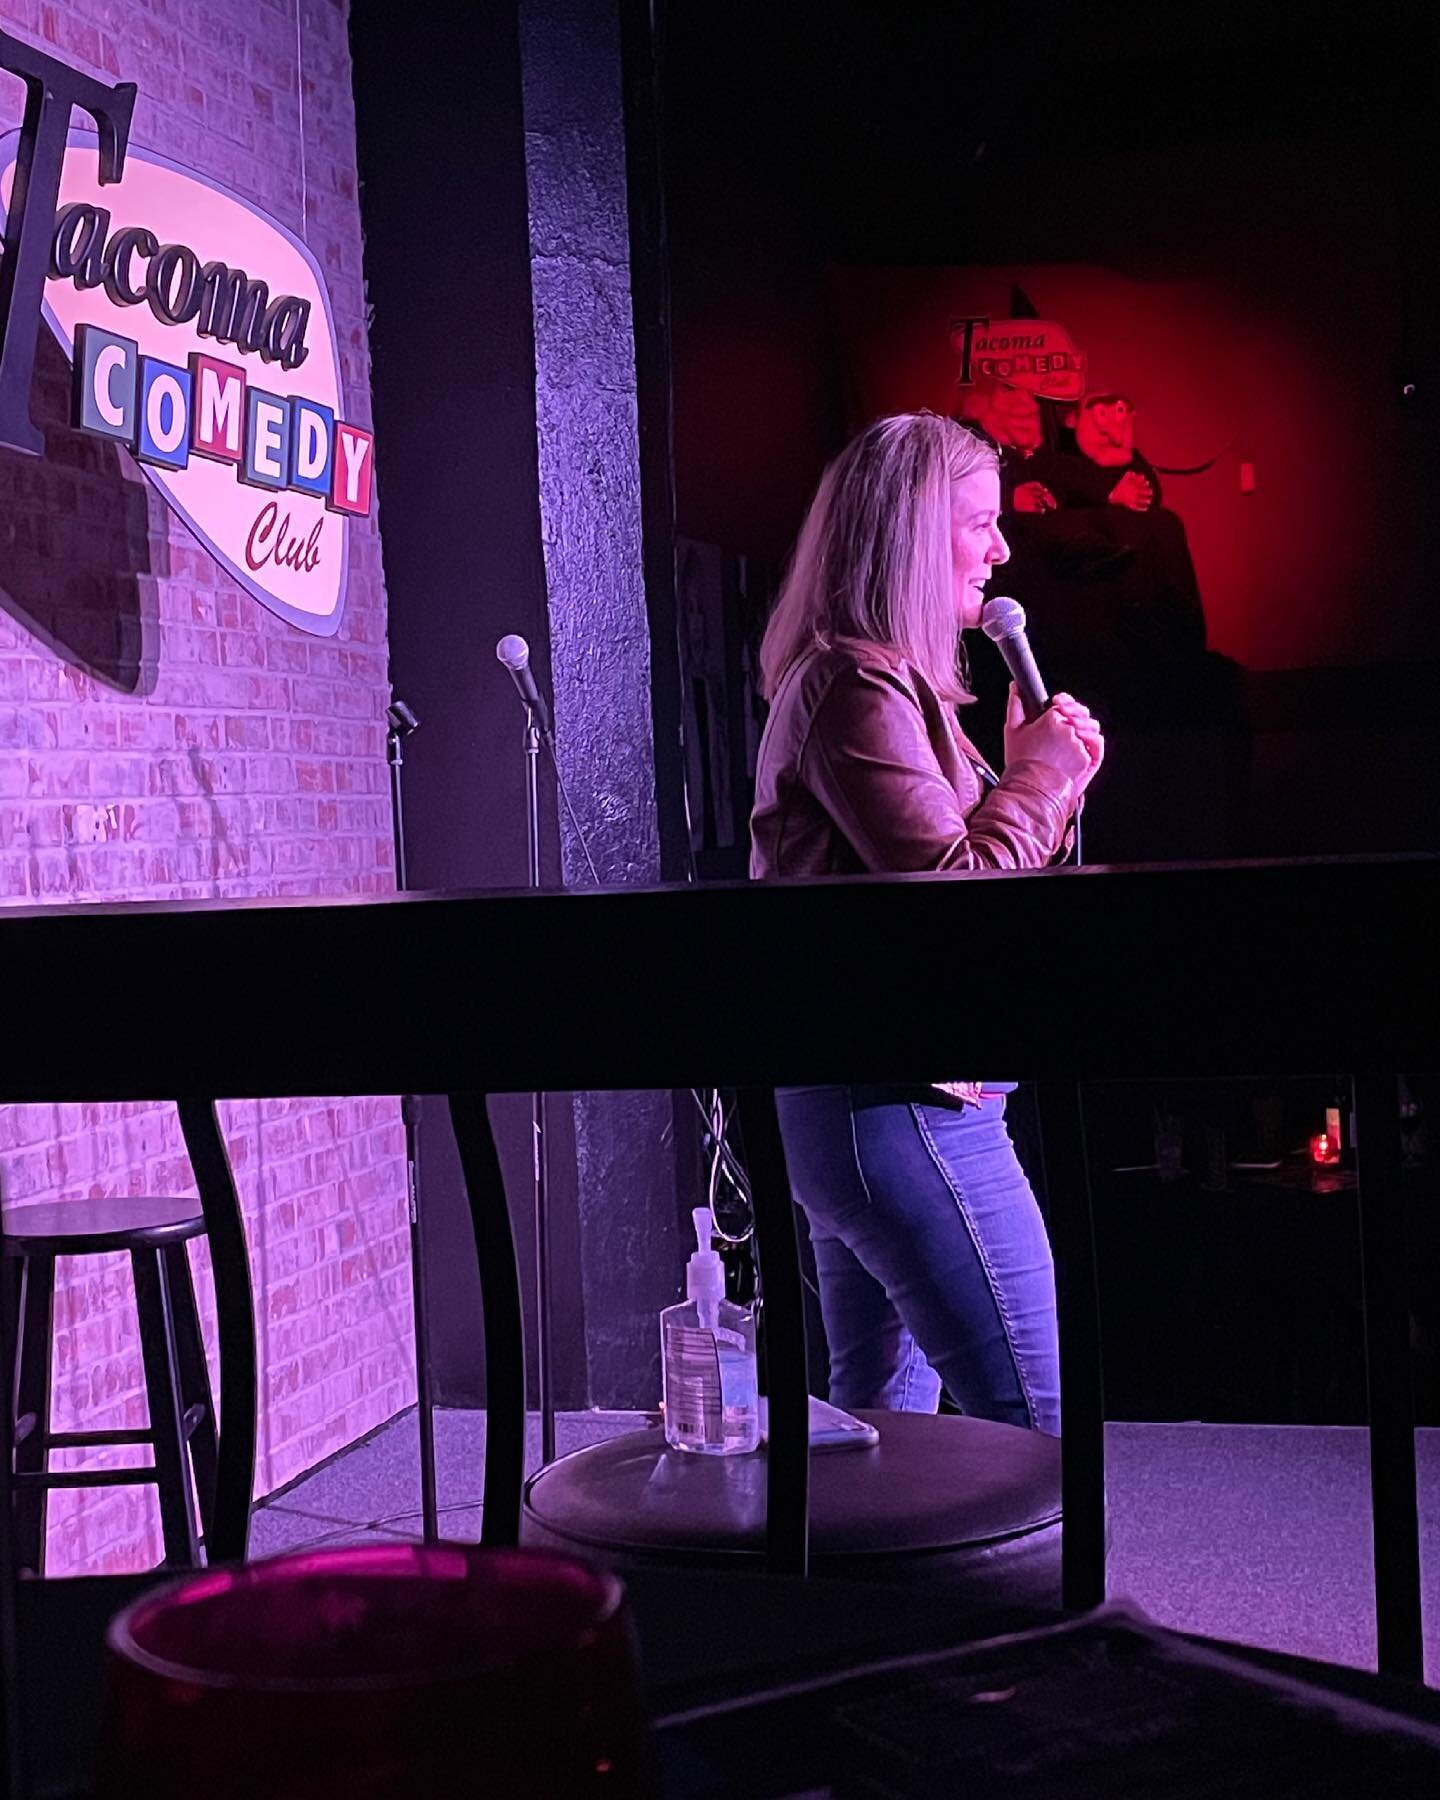 Had so much fun at @tacomacomedyclub! 🙌 What a line-up. Go see their shows! 

I&rsquo;m moving in 2 weeks but Seattle &mdash; GREAT NEWS! 😀 I&rsquo;ll be at @ravennaflyingboots in Ravenna on Thursday 6/17 at 7 PM!
&bull;
&bull;
#comedy #tacomacomed